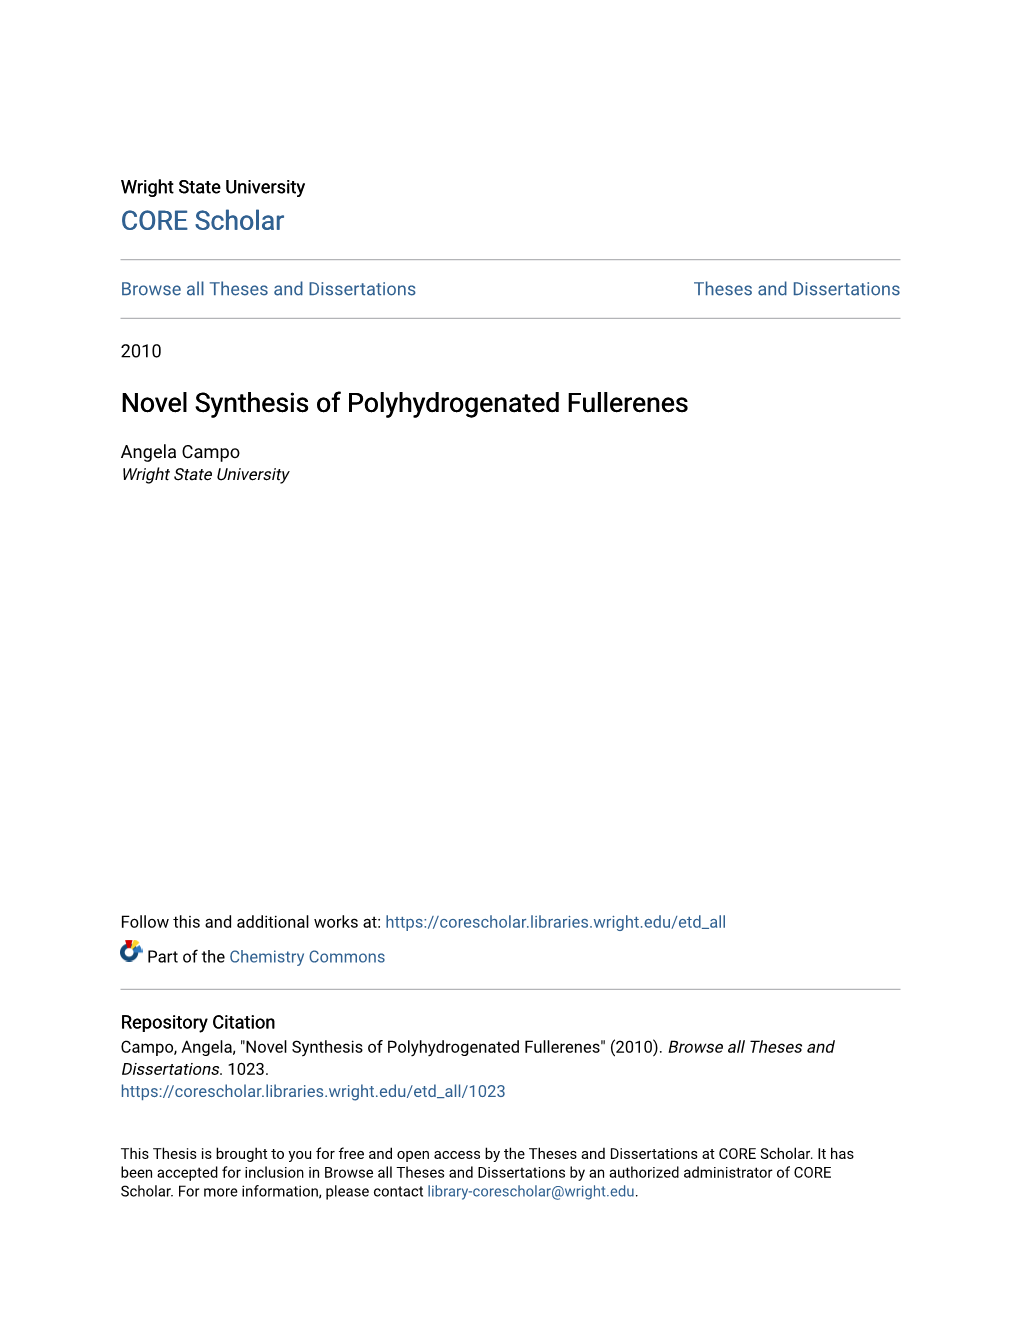 Novel Synthesis of Polyhydrogenated Fullerenes